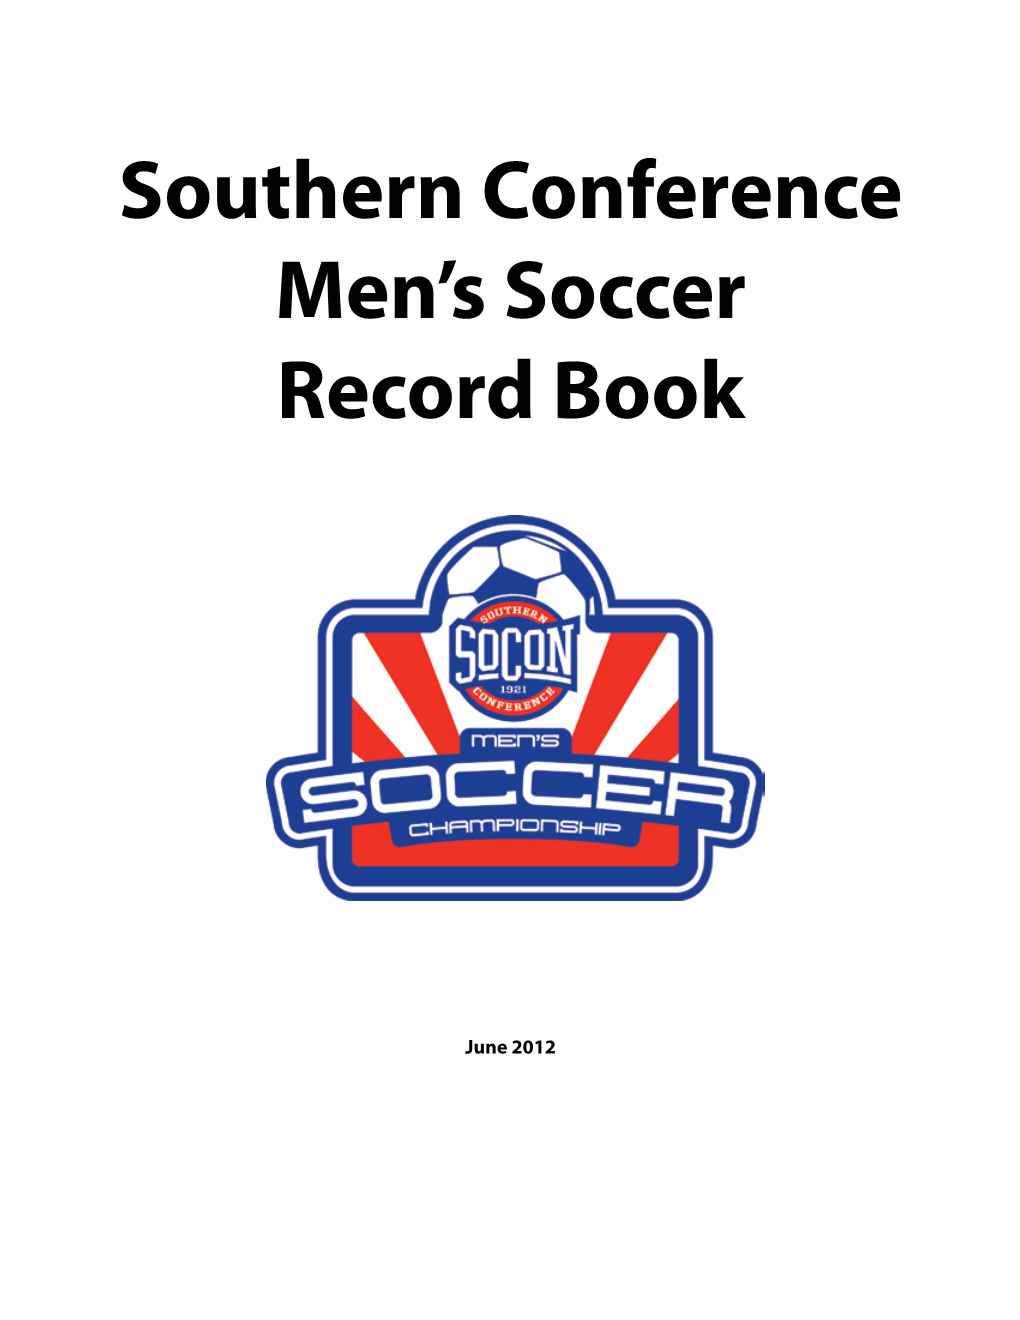 Southern Conference Men's Soccer Record Book